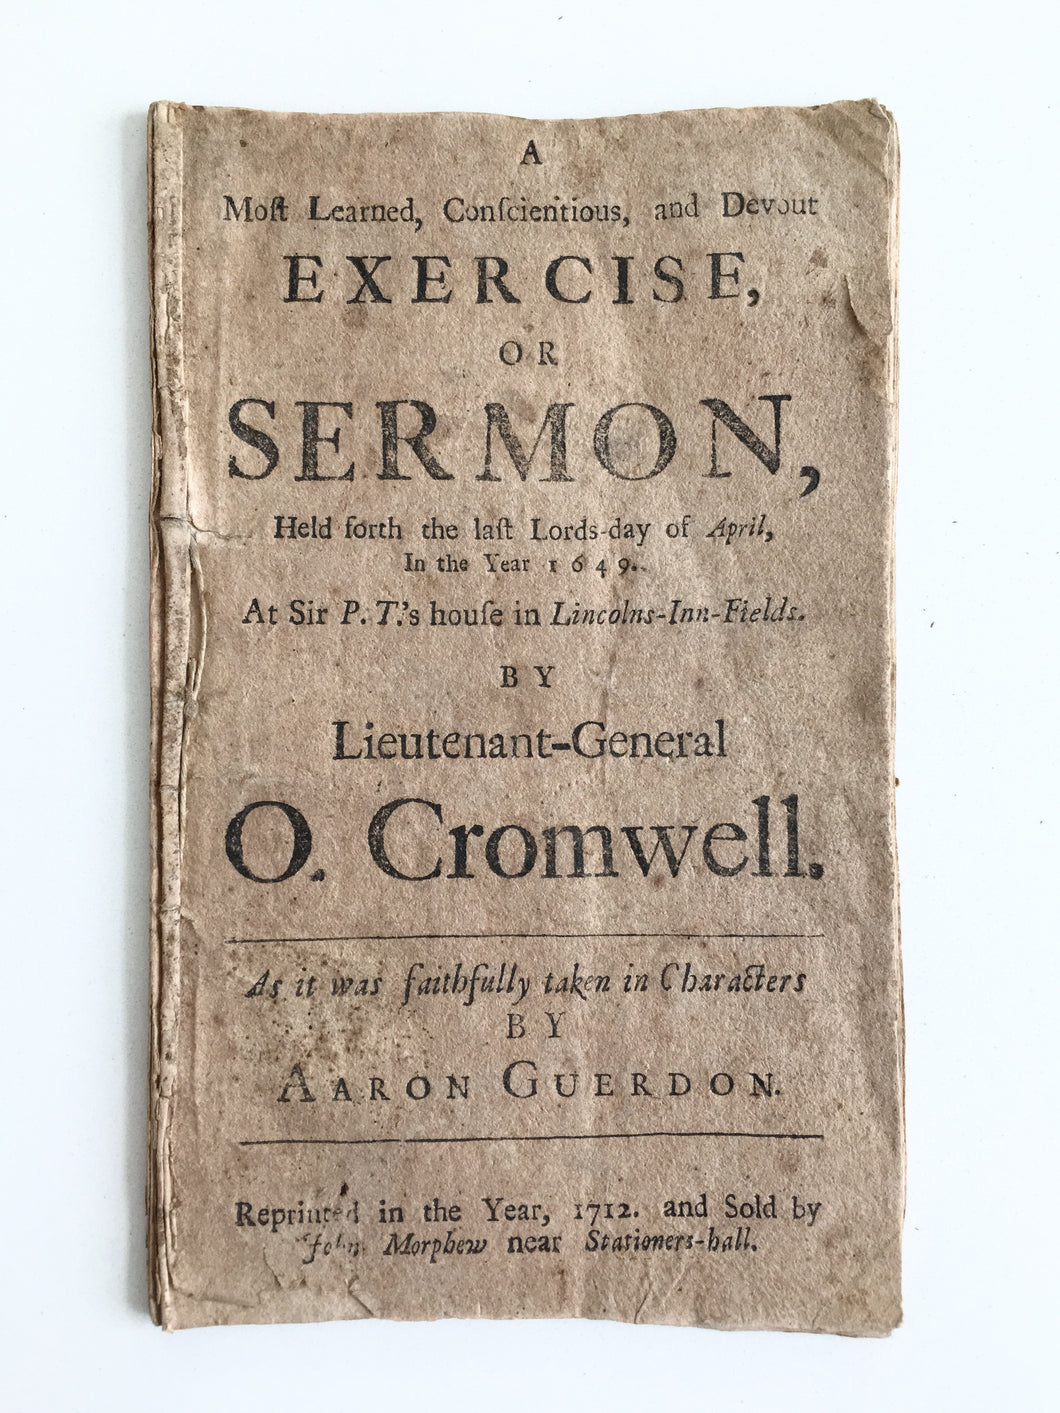 1649 OLIVER CROMWELL. Sermon Delivered by the Famous Puritan Protector